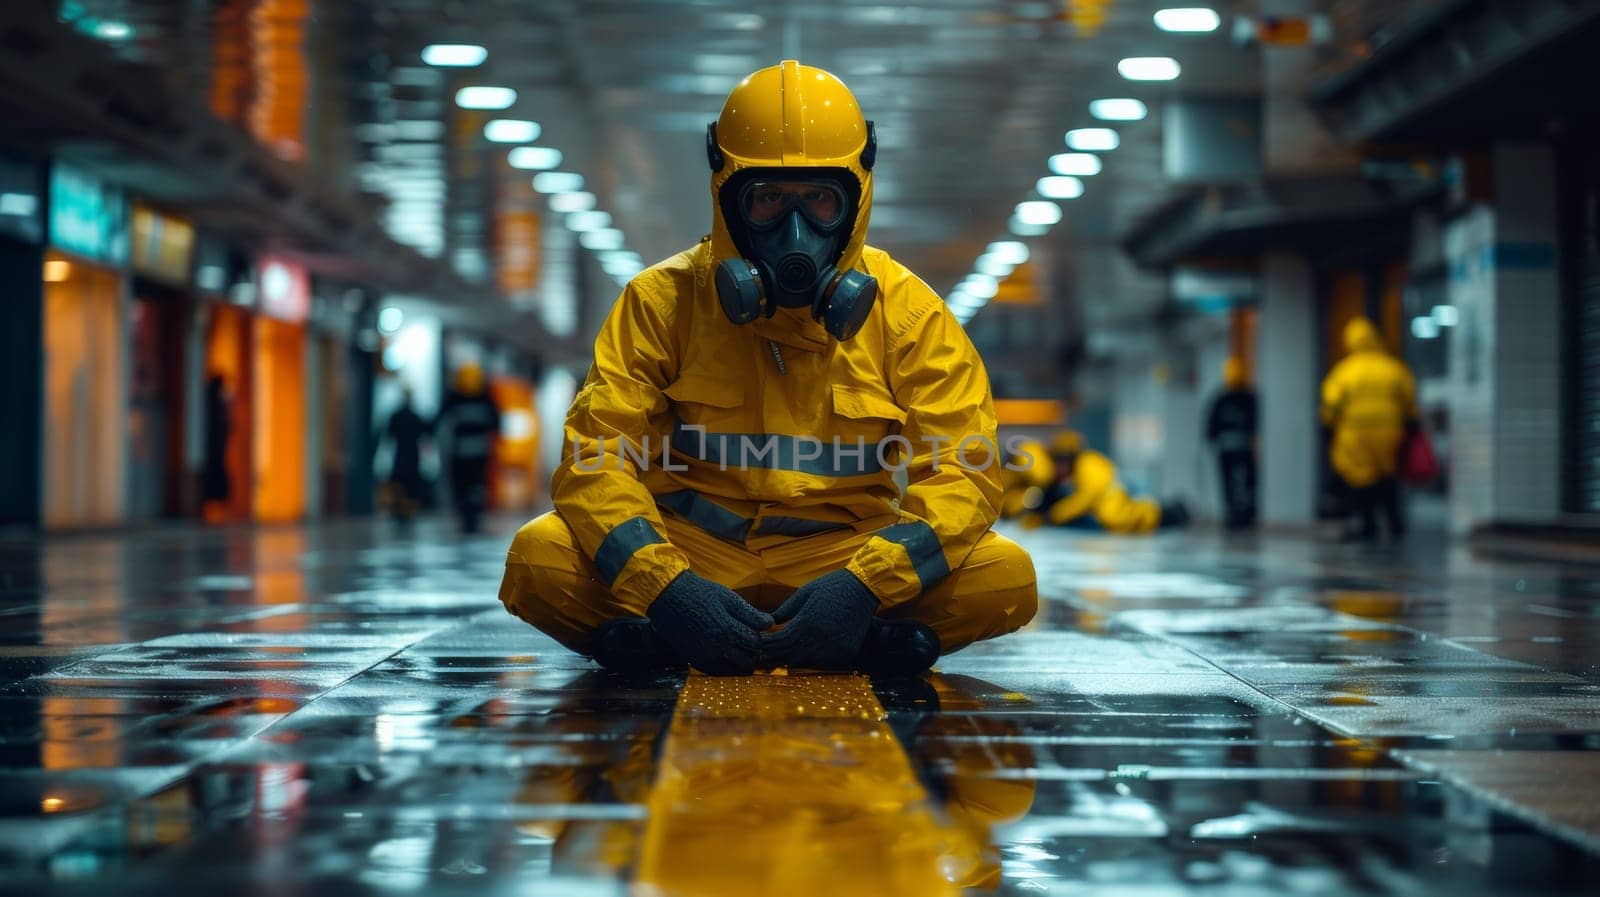 A man in yellow and orange suit sitting on floor of a building, AI by starush